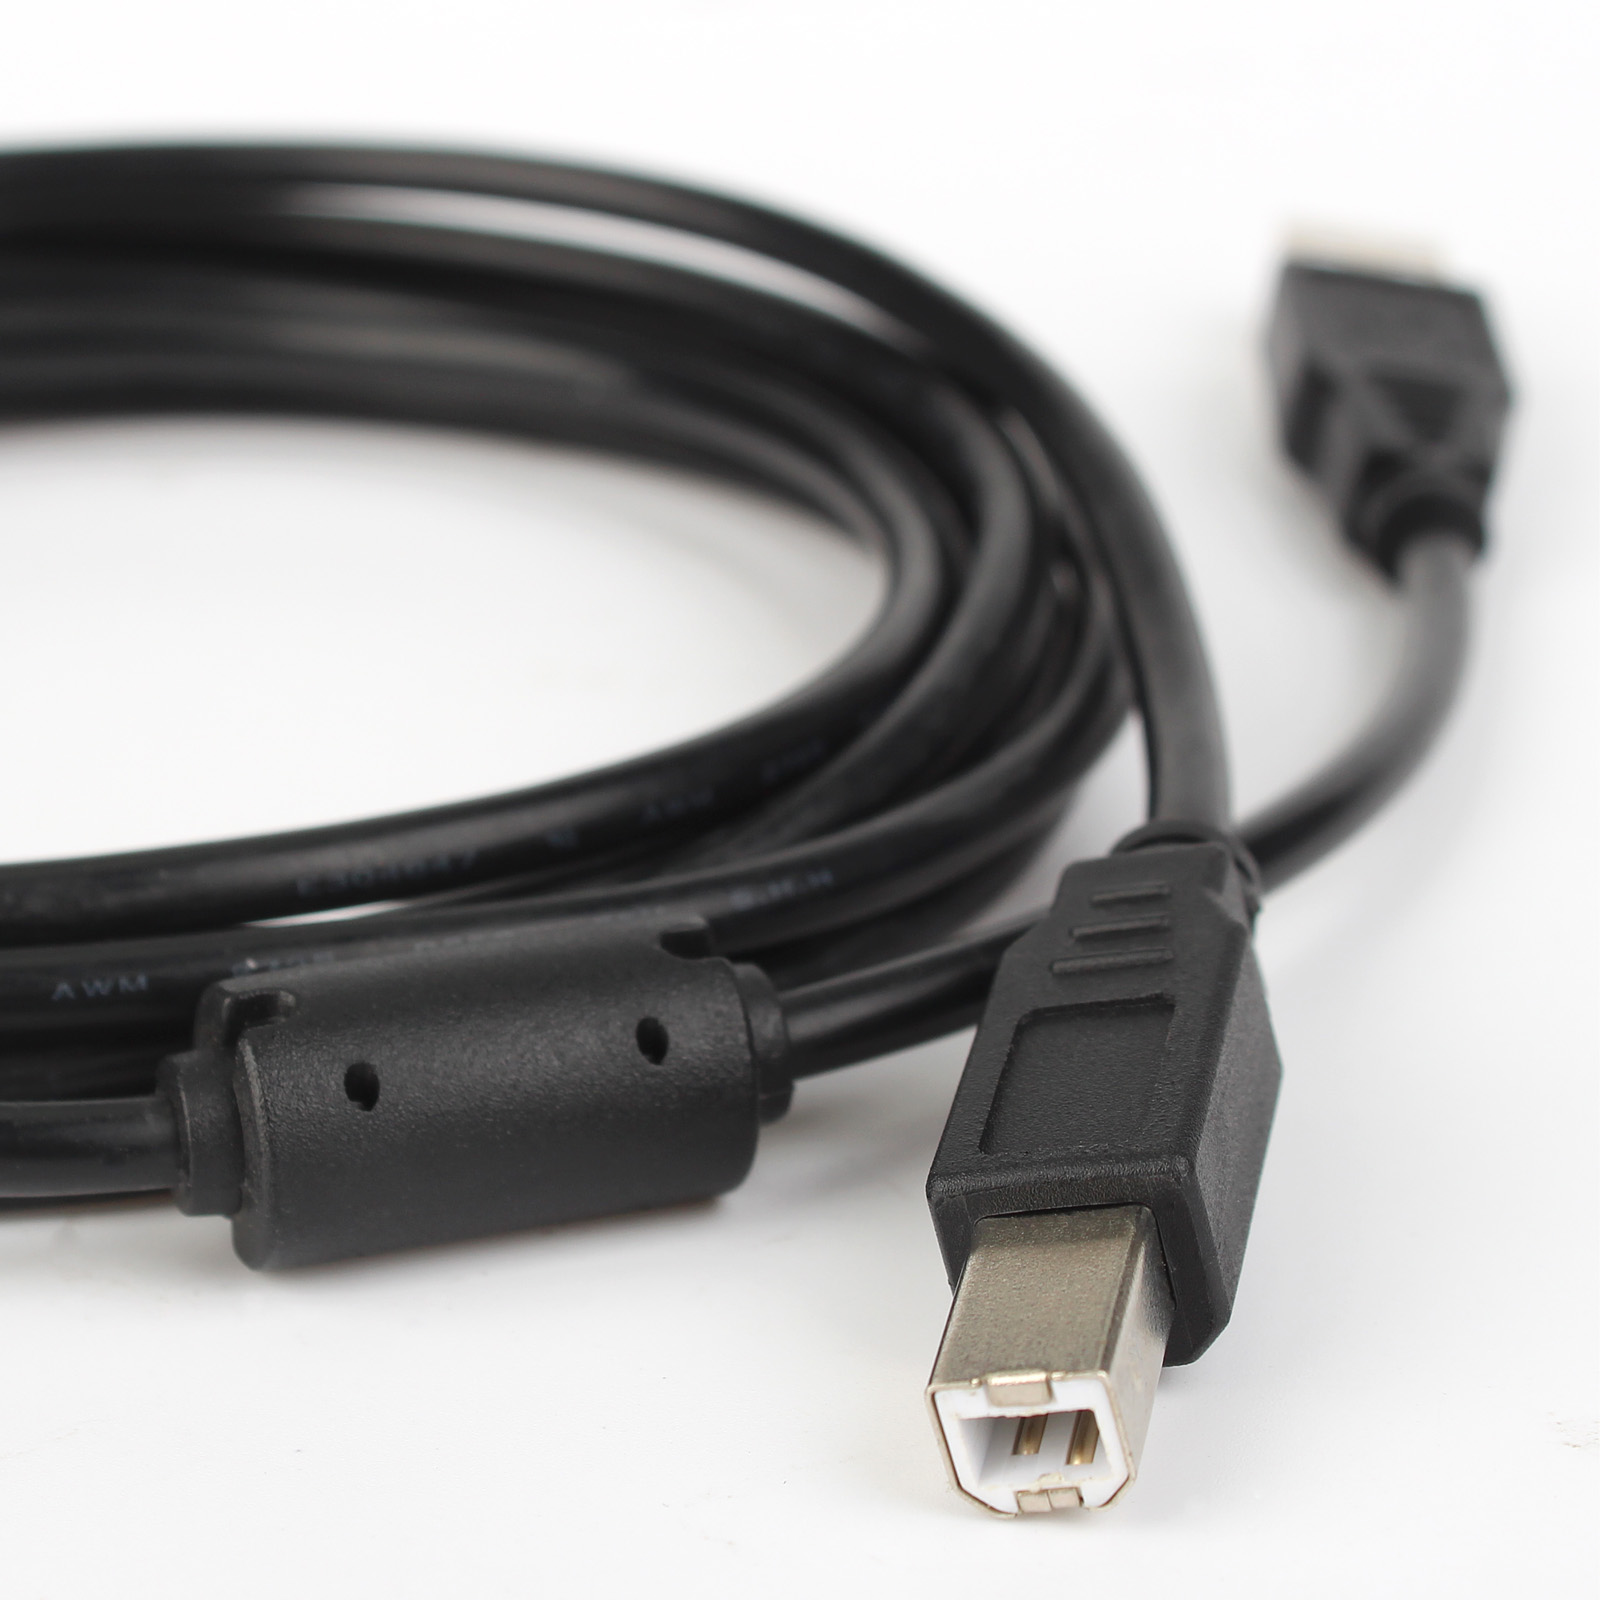 High usb 2.0. USB Shielded High Speed Cable 2.0 revision 28awg/1p+24awg/2c. USB Shielded High Speed Cable 2.0 revision 28awg/1p+24awg/2c e328232. USB 2.0 кабель 28 AWG/2c+26awg/2c. Кабель 28awg/1p+28awg/2c.